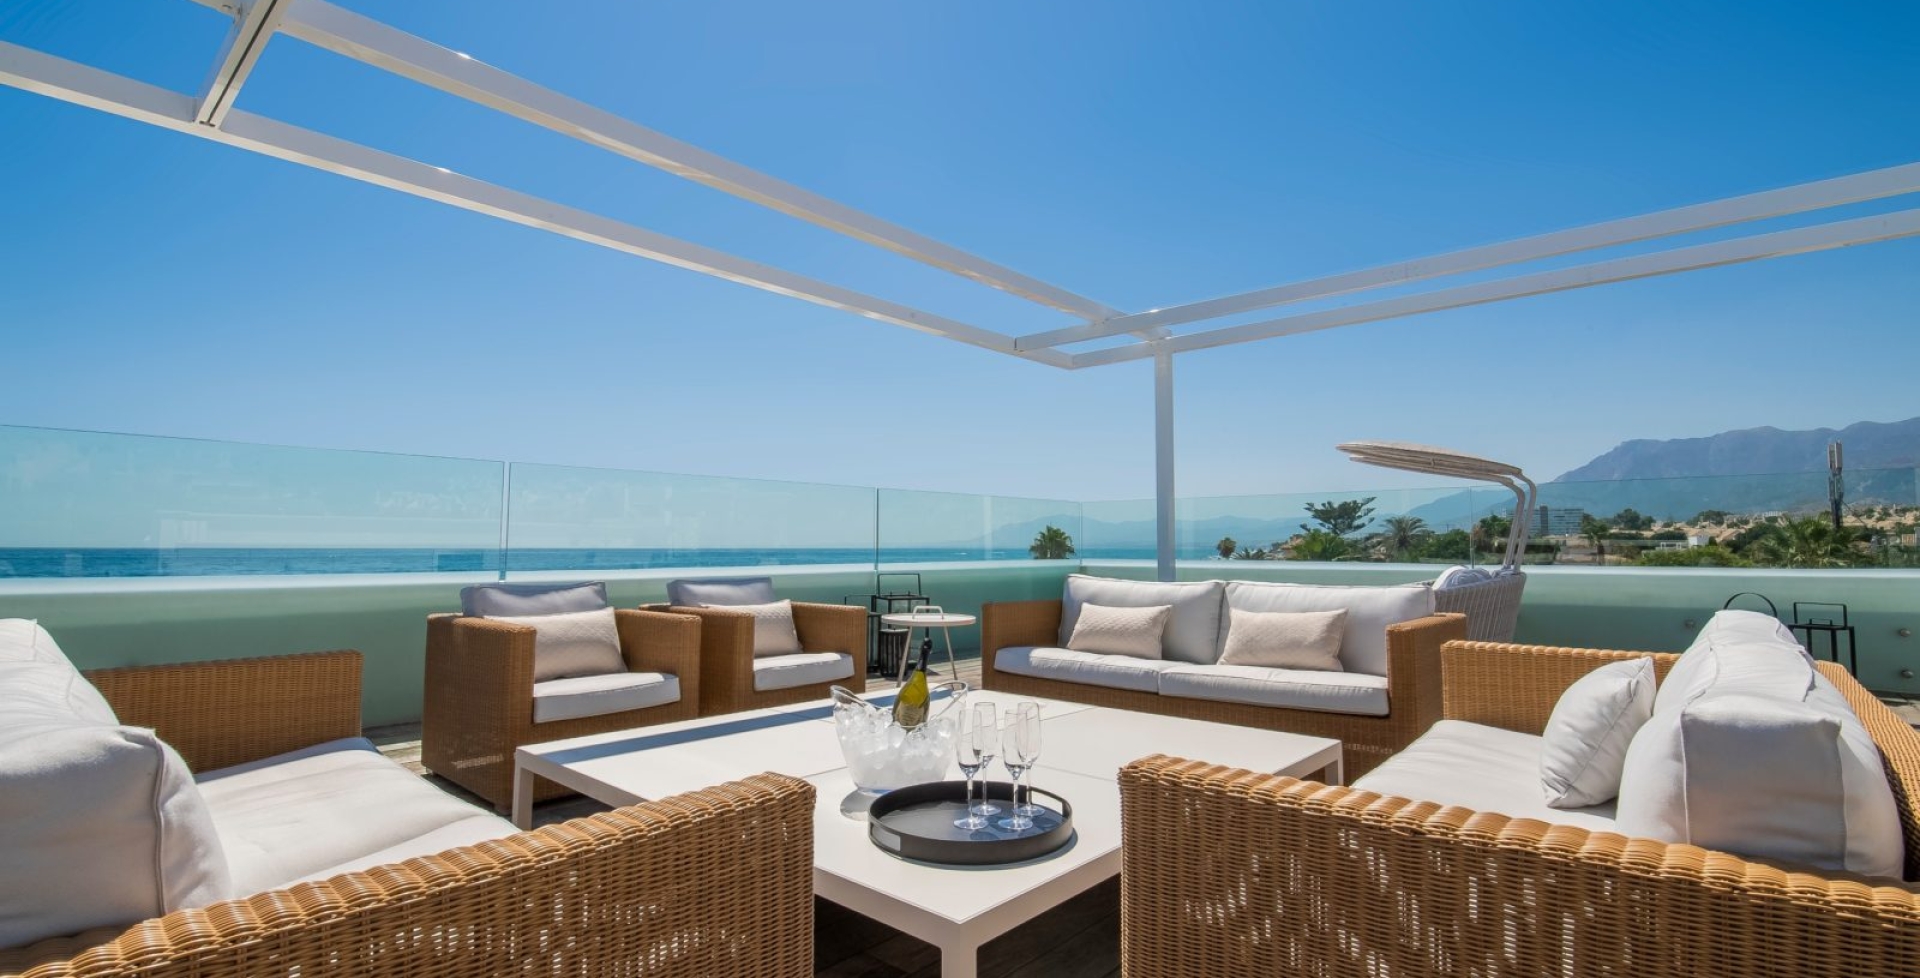 Beach House Marbella 6 bedrooms perfect place for sunset